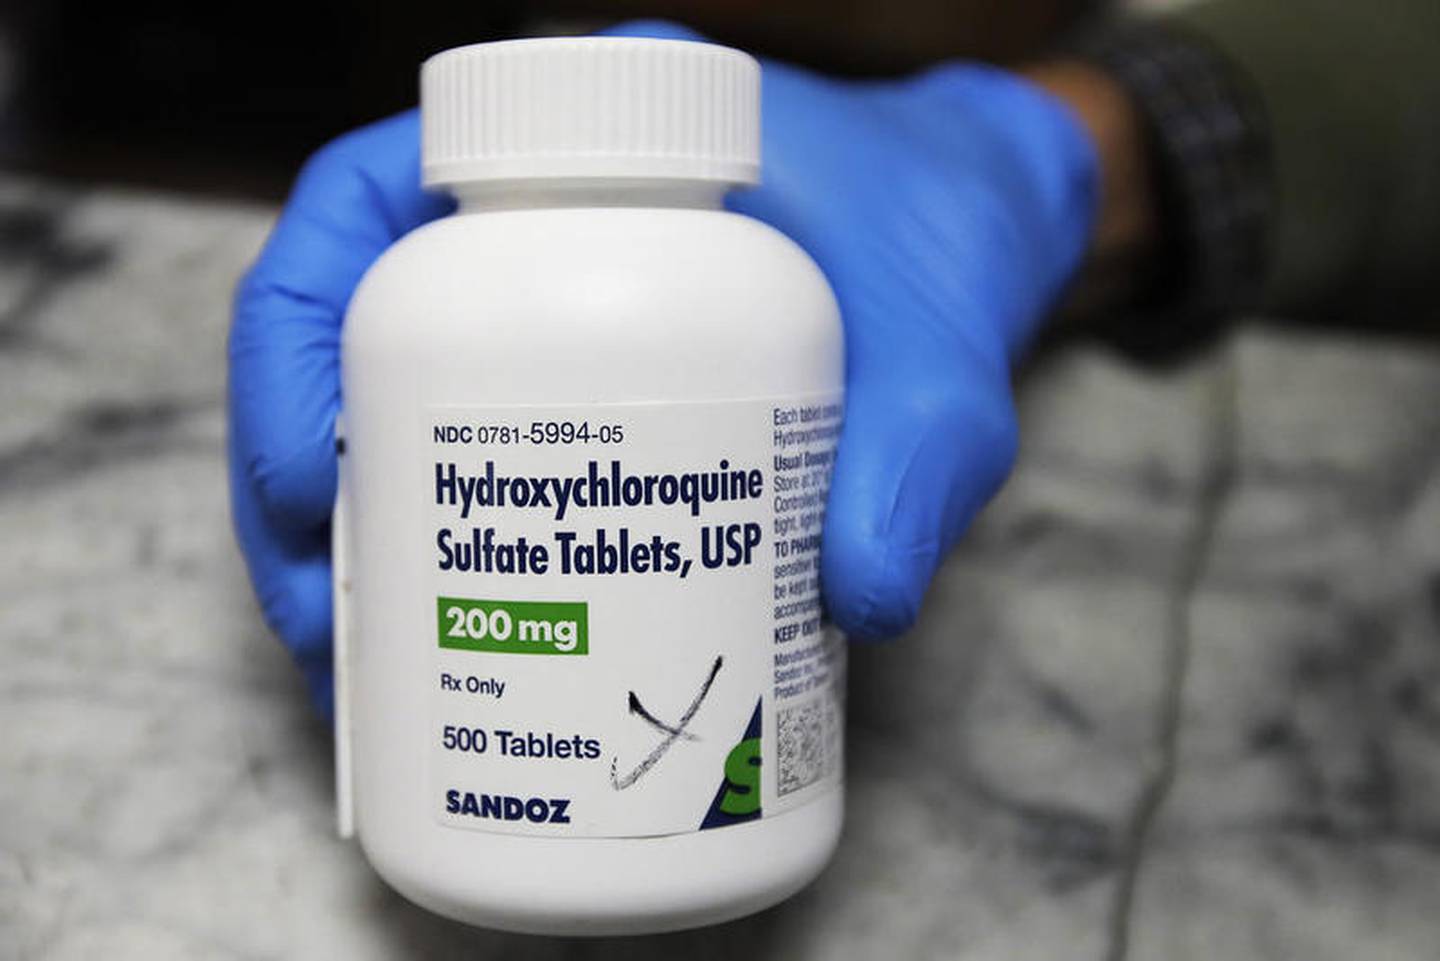 FILE - In this April 6, 2020 file photo, a pharmacist holds a bottle of the drug hydroxychloroquine in Oakland, Calif. Results published Wednesday, June 3, 2020, by the New England Journal of Medicine show that hydroxychloroquine was no better than placebo pills at preventing illness from the COVID-19 coronavirus. The drug did not seem to cause serious harm, though - about 40% on it had side effects, mostly mild stomach problems. (AP Photo/Ben Margot)